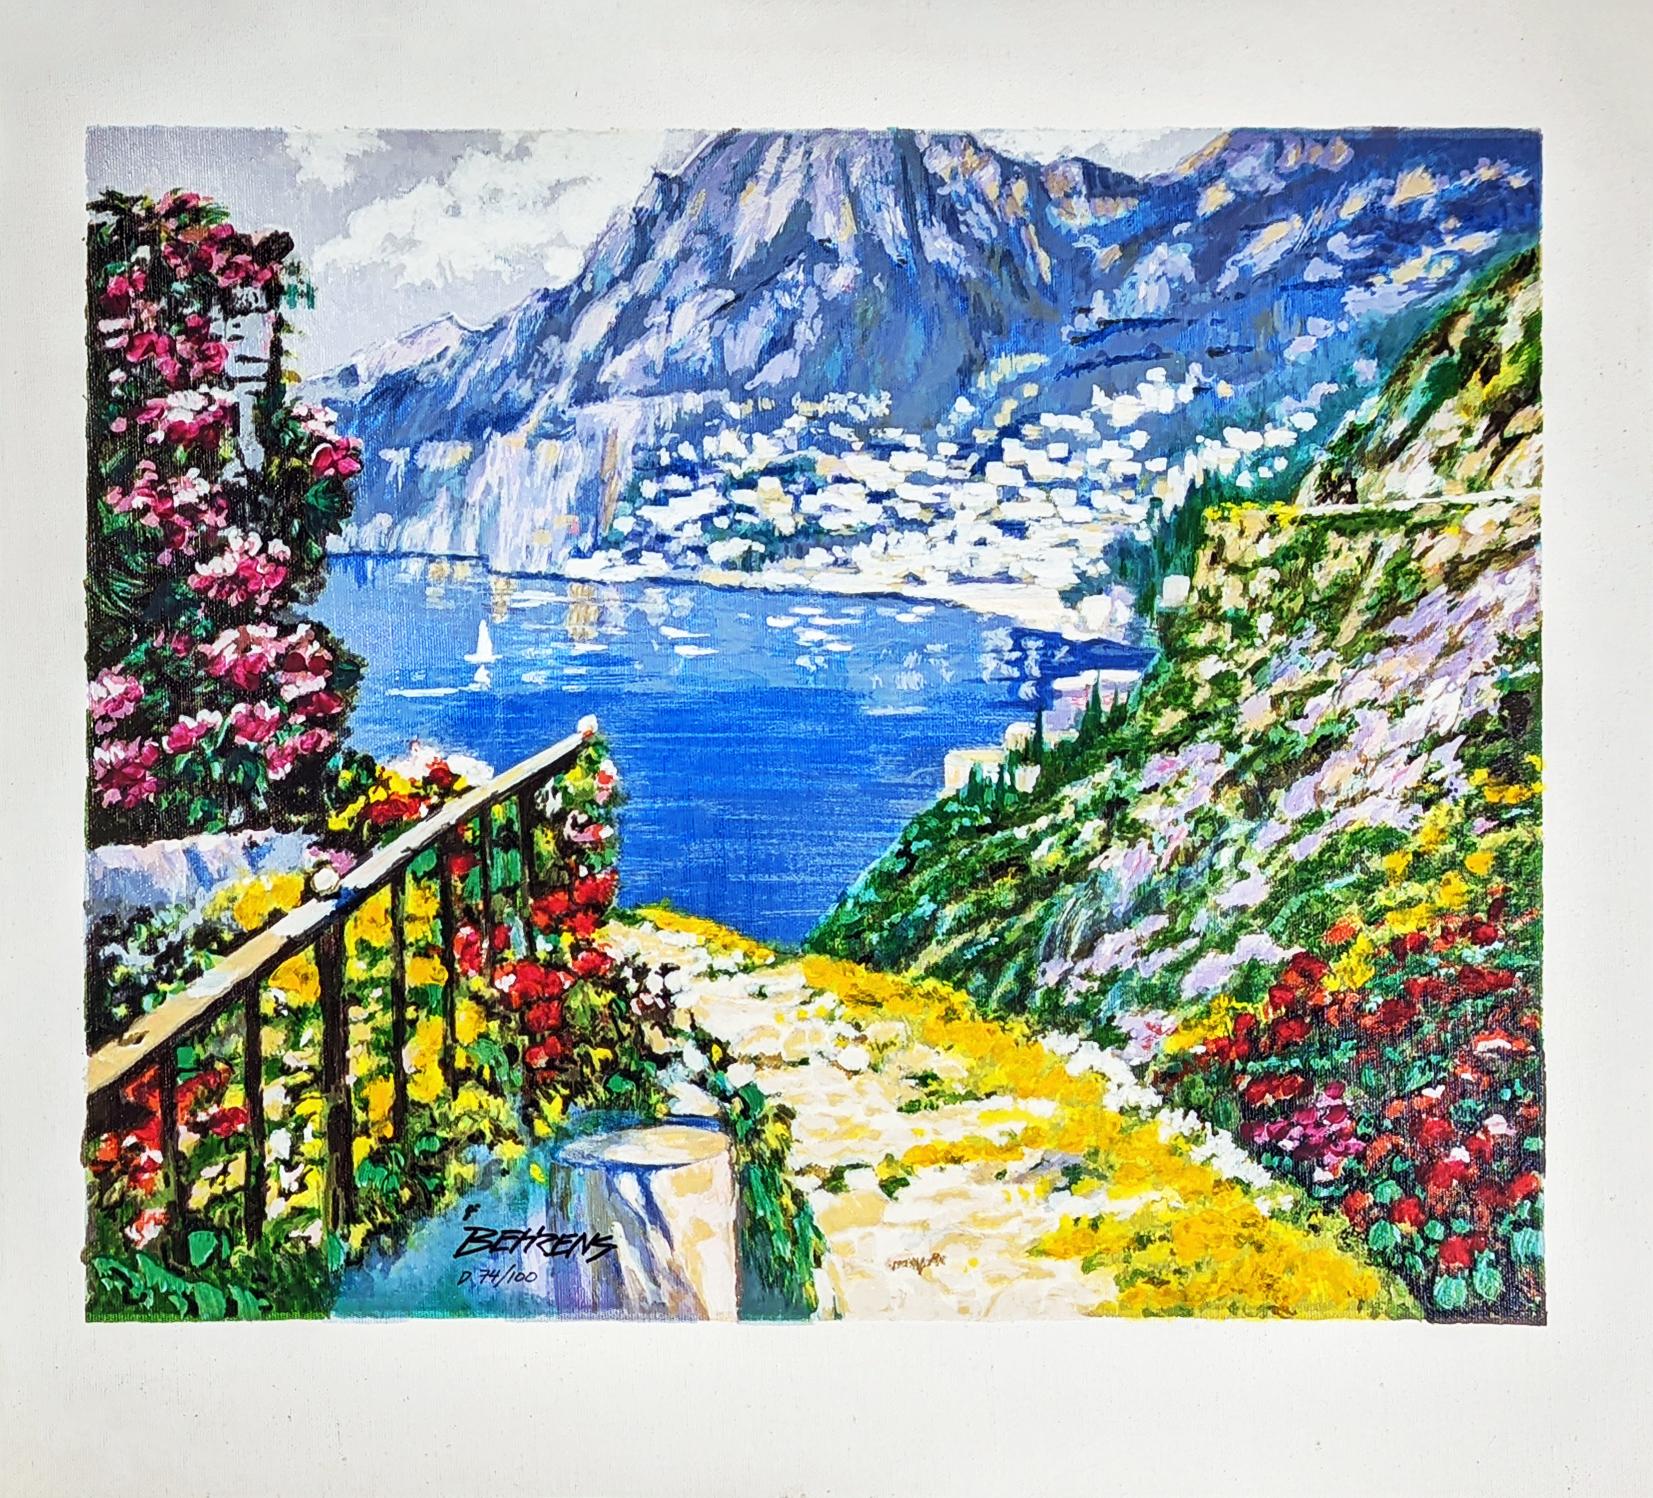 ROAD TO POSITANO (EMBELLISHED) - Print by Howard Behrens